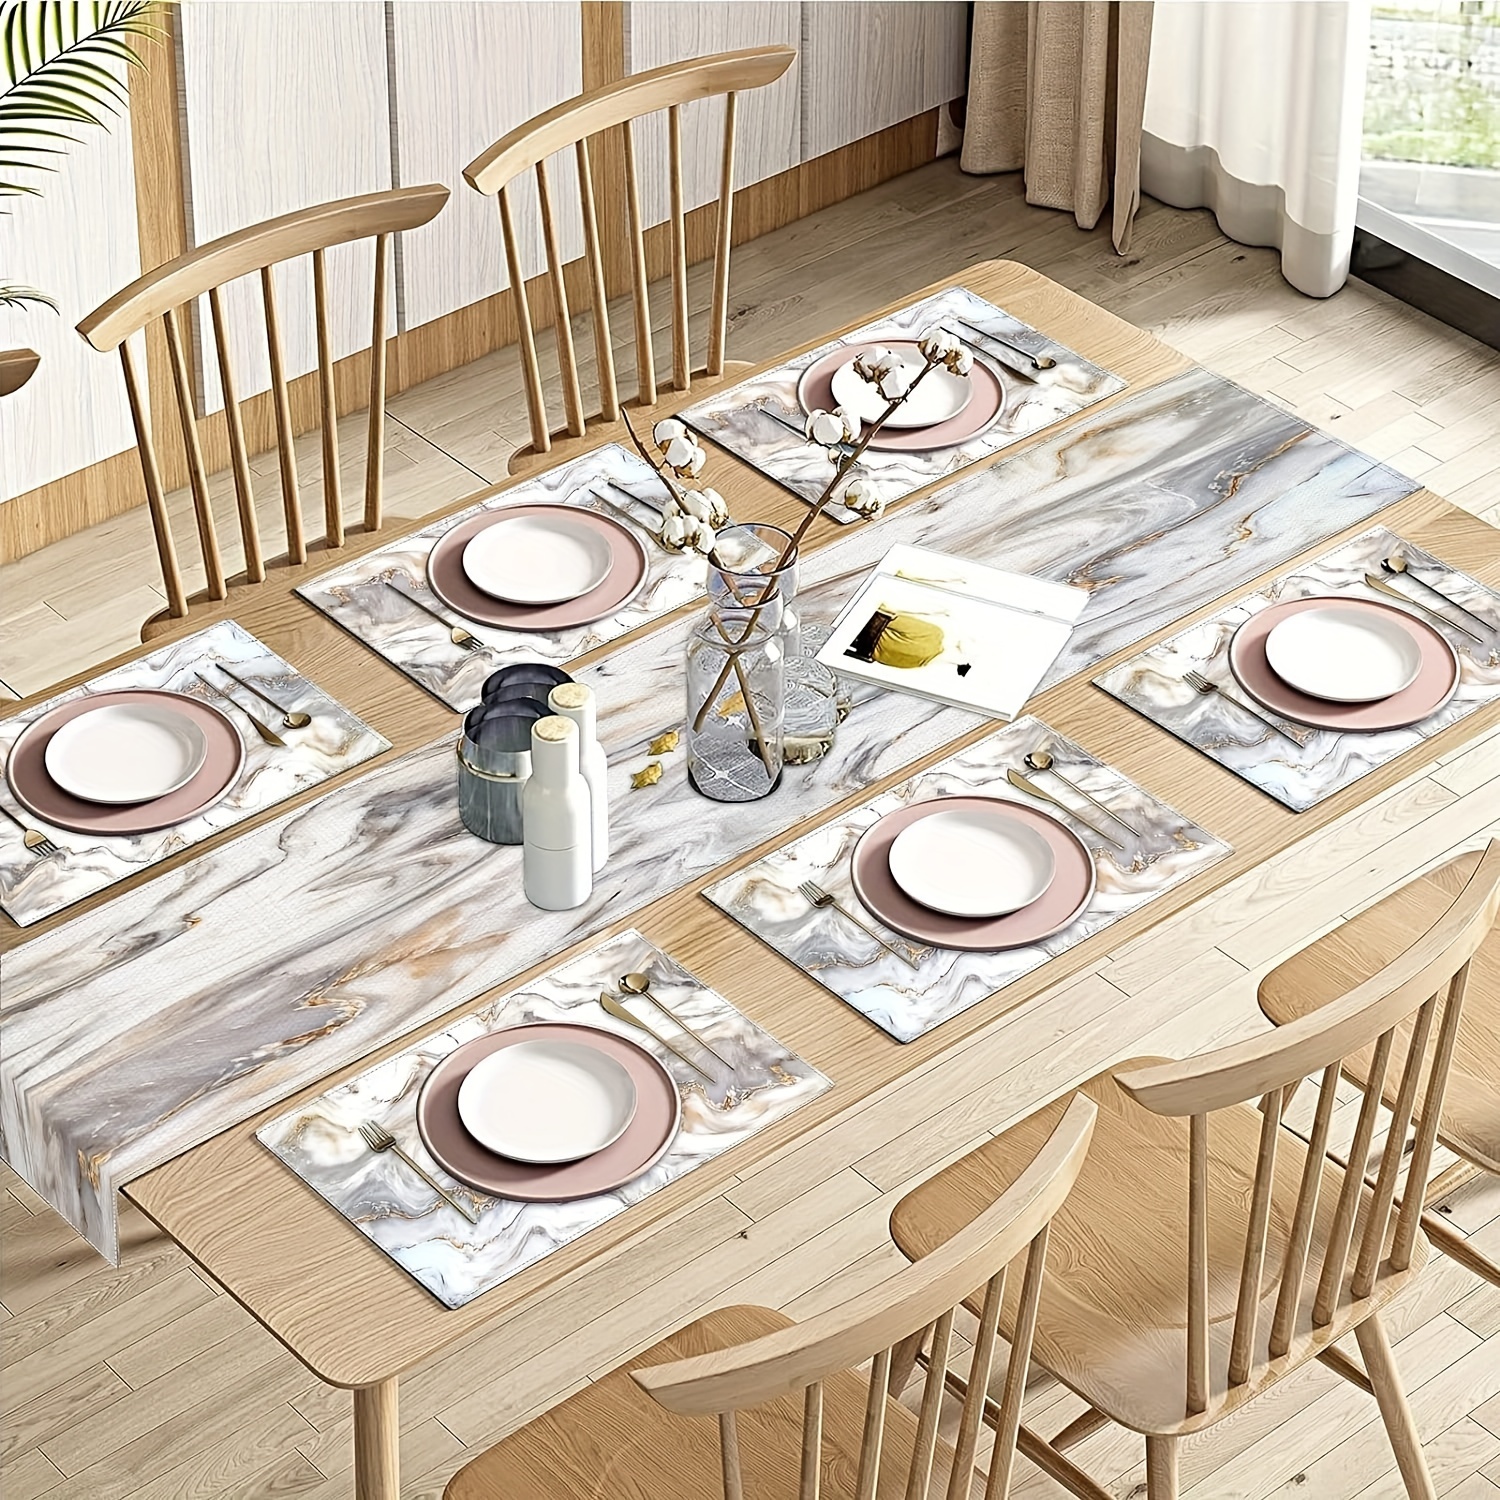 

7pcs, Dining Decor Set, Linen Marble Printed Table Runner With 6 Coordinated Placemats, Modern Abstract Grey White Gold Marbling Design For Everyday Table Decor